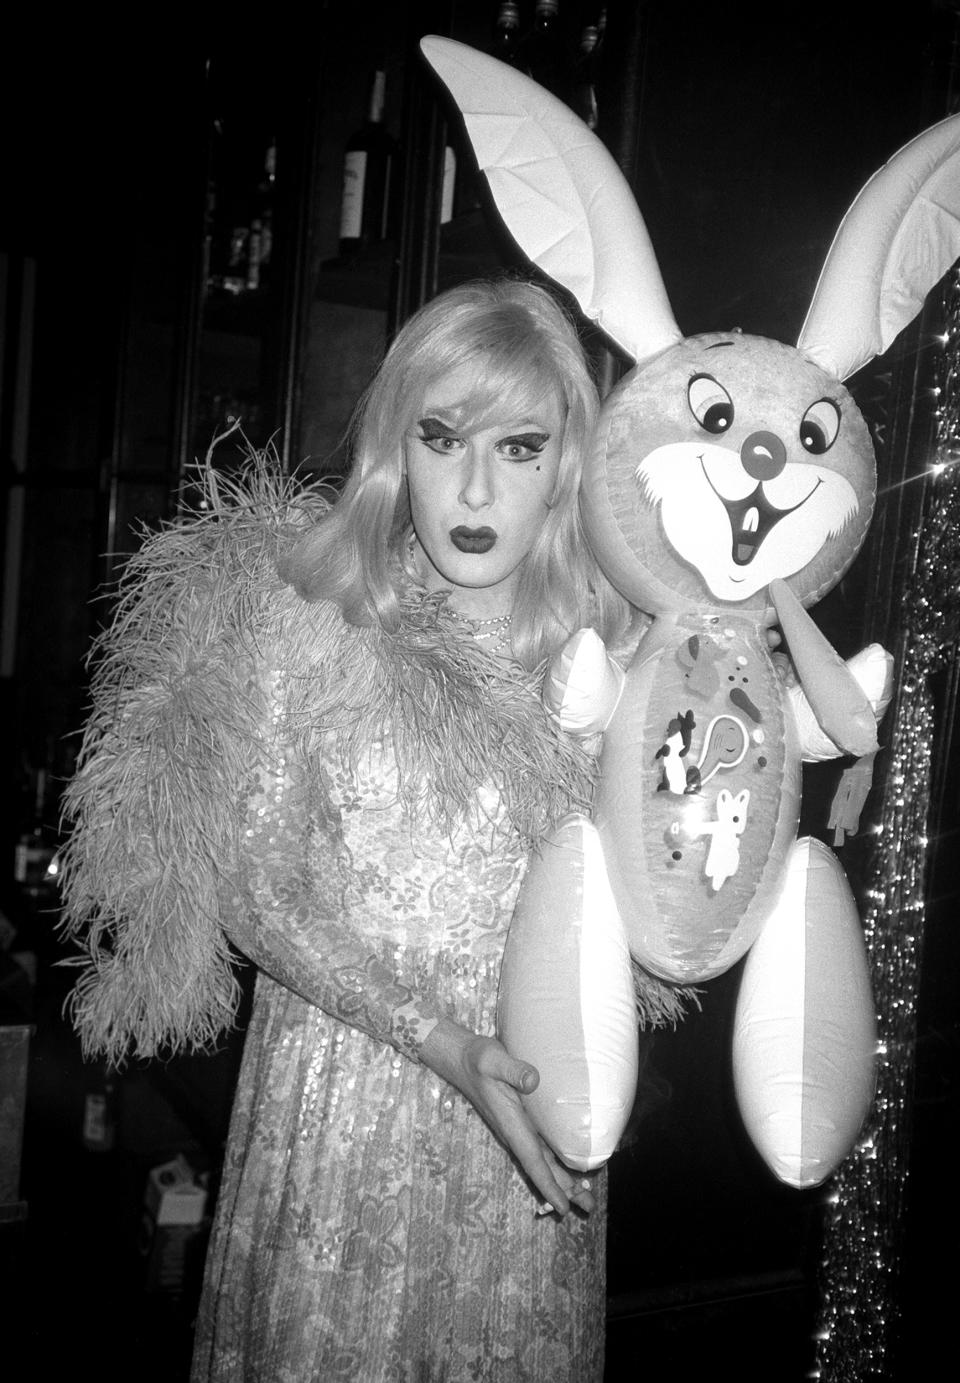 Lady Bunny at Area (Paul Bruinooge/Patrick McMullan via Getty Images)